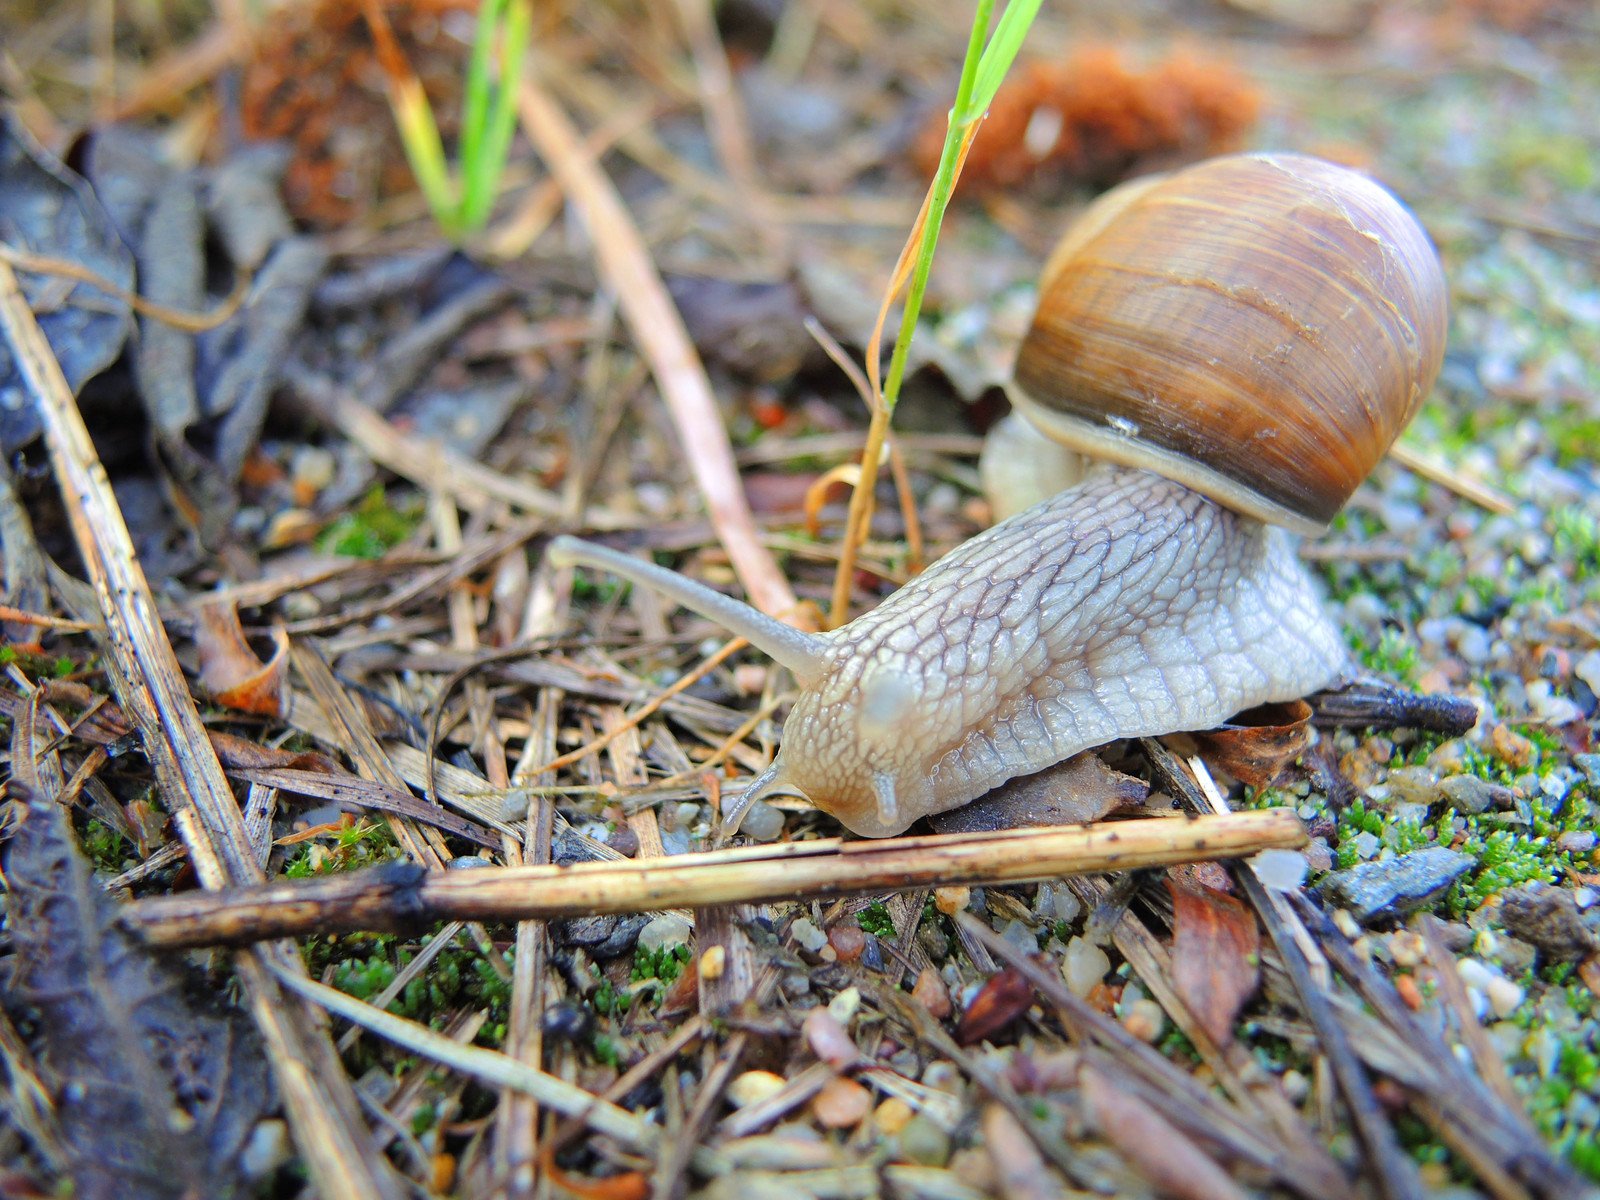 a small snail on the ground among grass